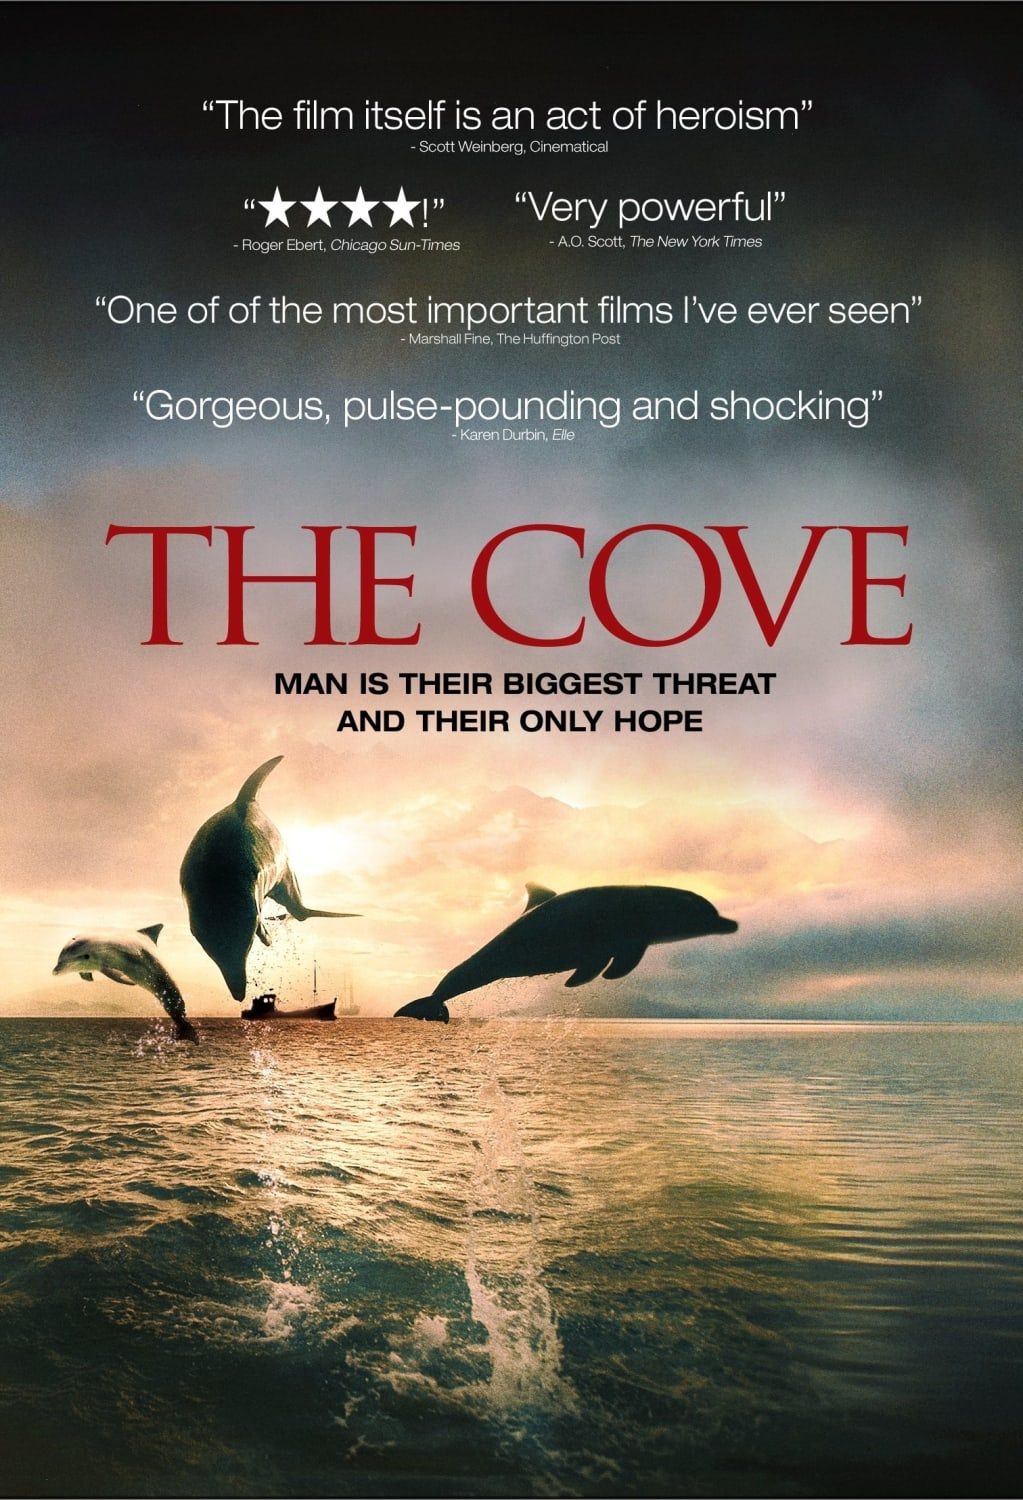 The Cove (DVD) on MovieShack